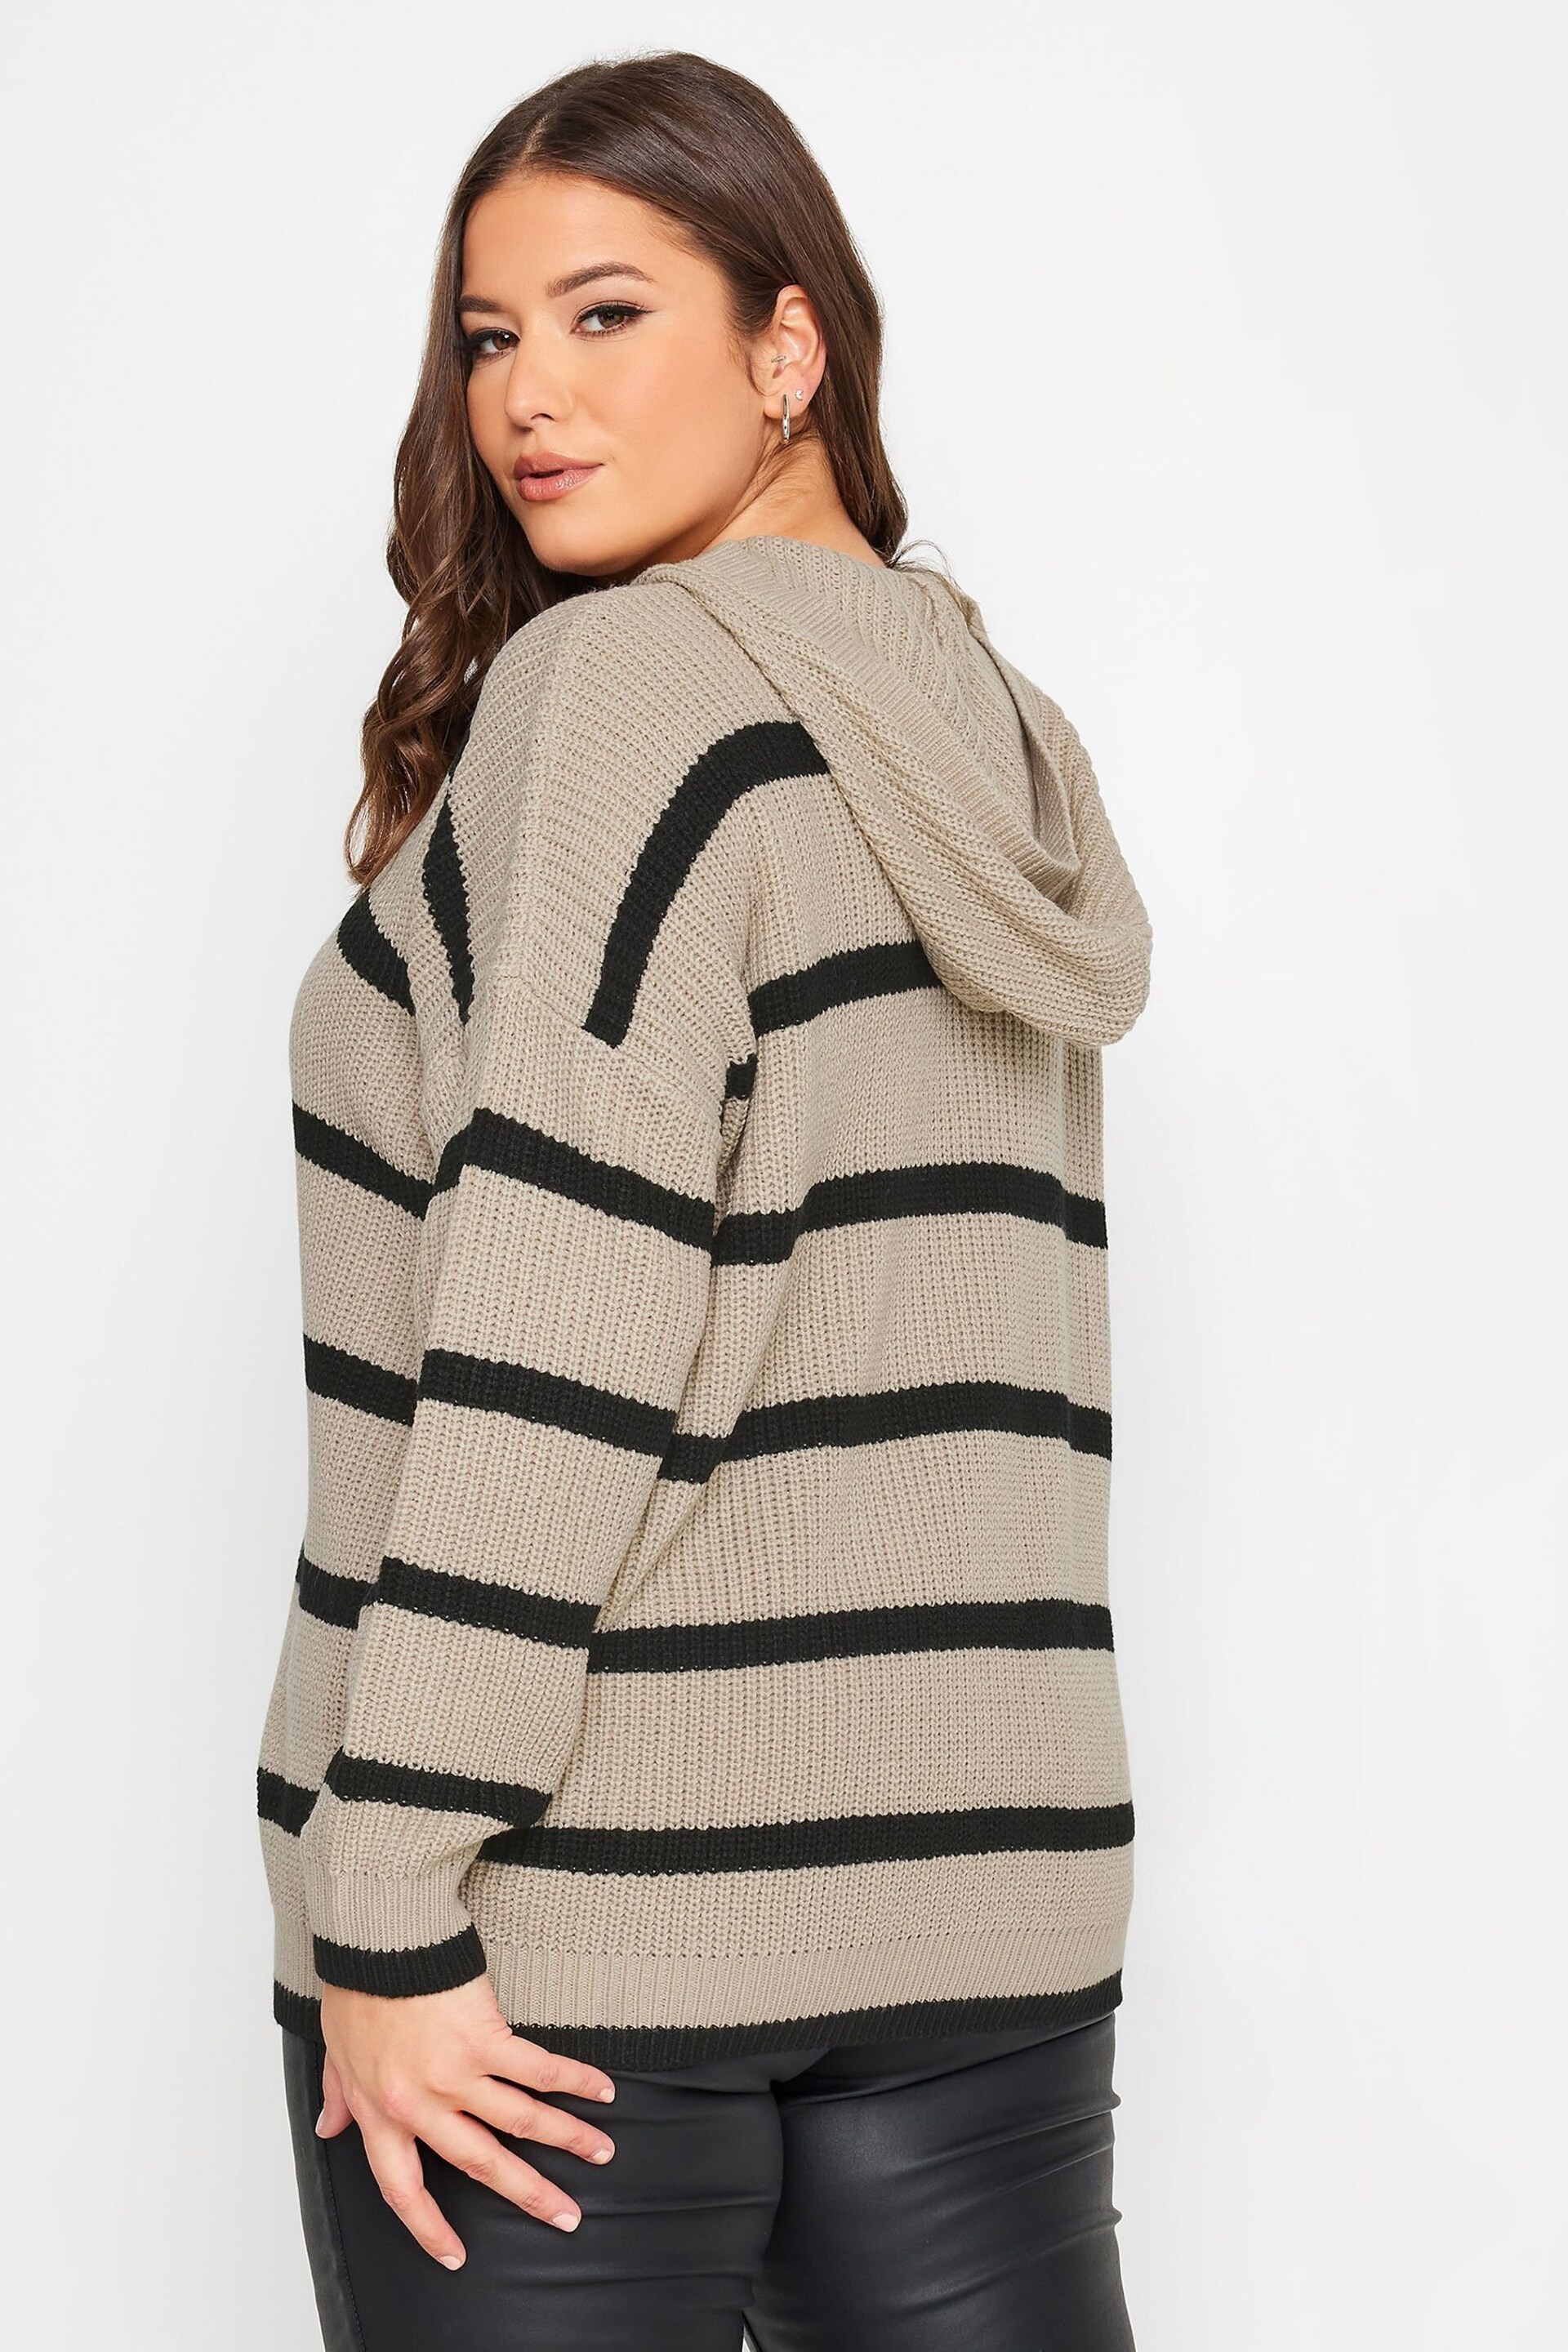 Yours Curve Cream Stripe Hooded Jumper - Image 2 of 4